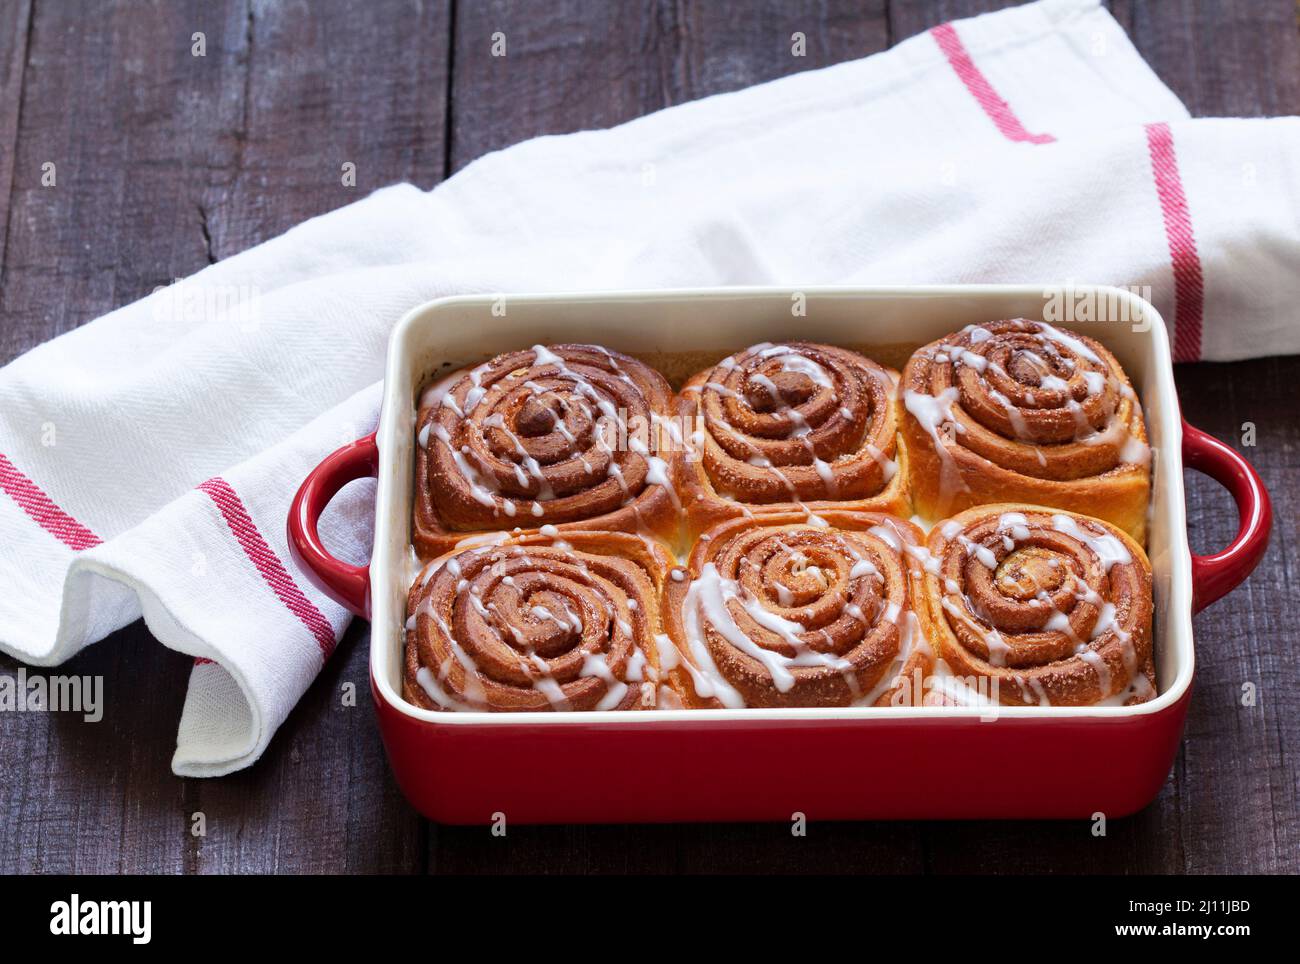 Traditional cinnamon buns with icing on a wooden table. Rustic style. Stock Photo